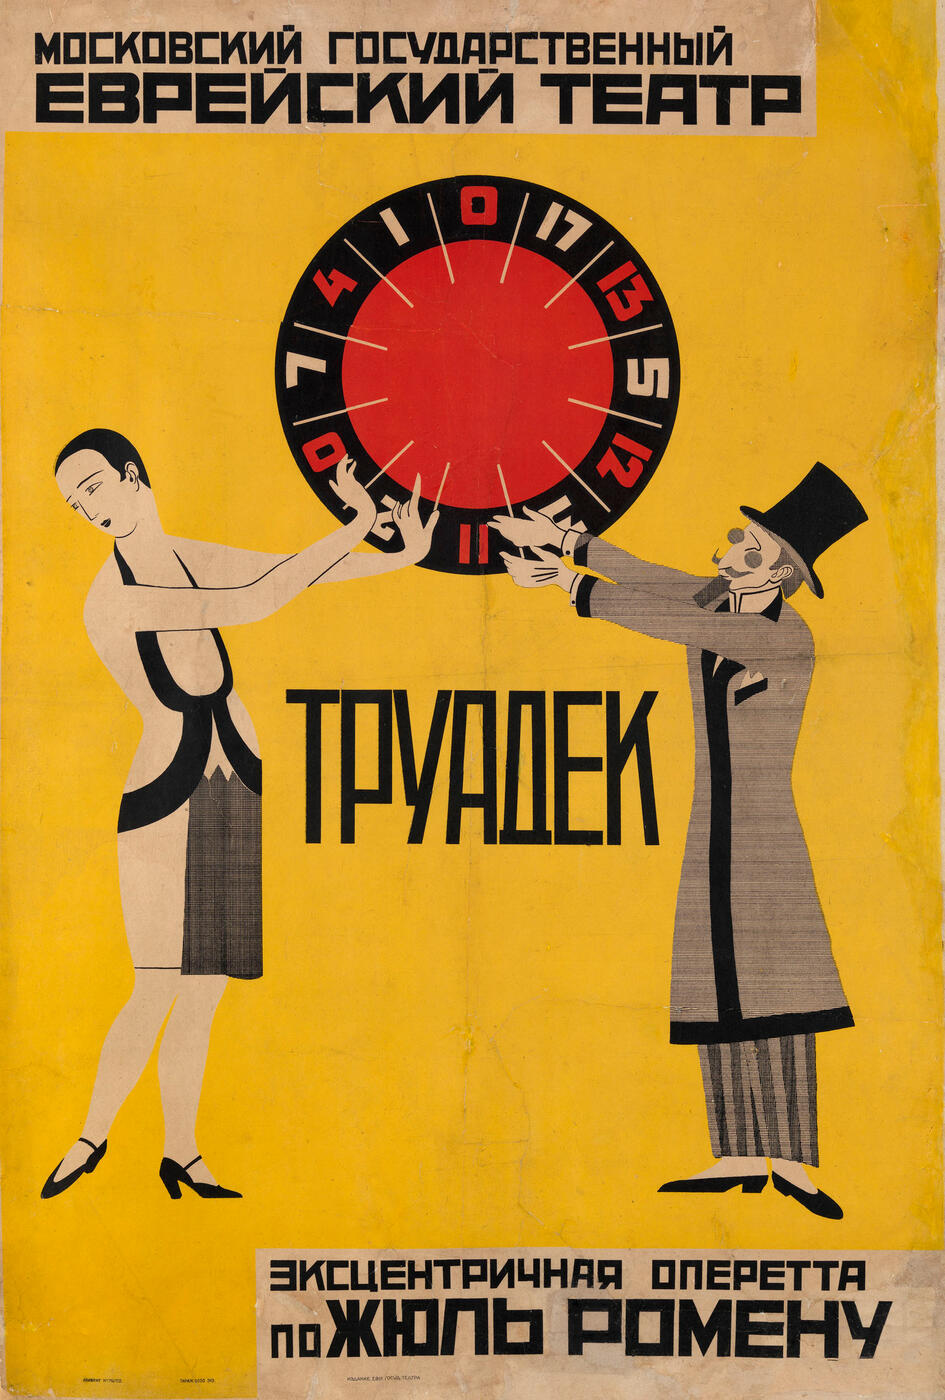 Poster for the J. Romain Operetta “Truadek”, The State Moscow Jewish Theatre